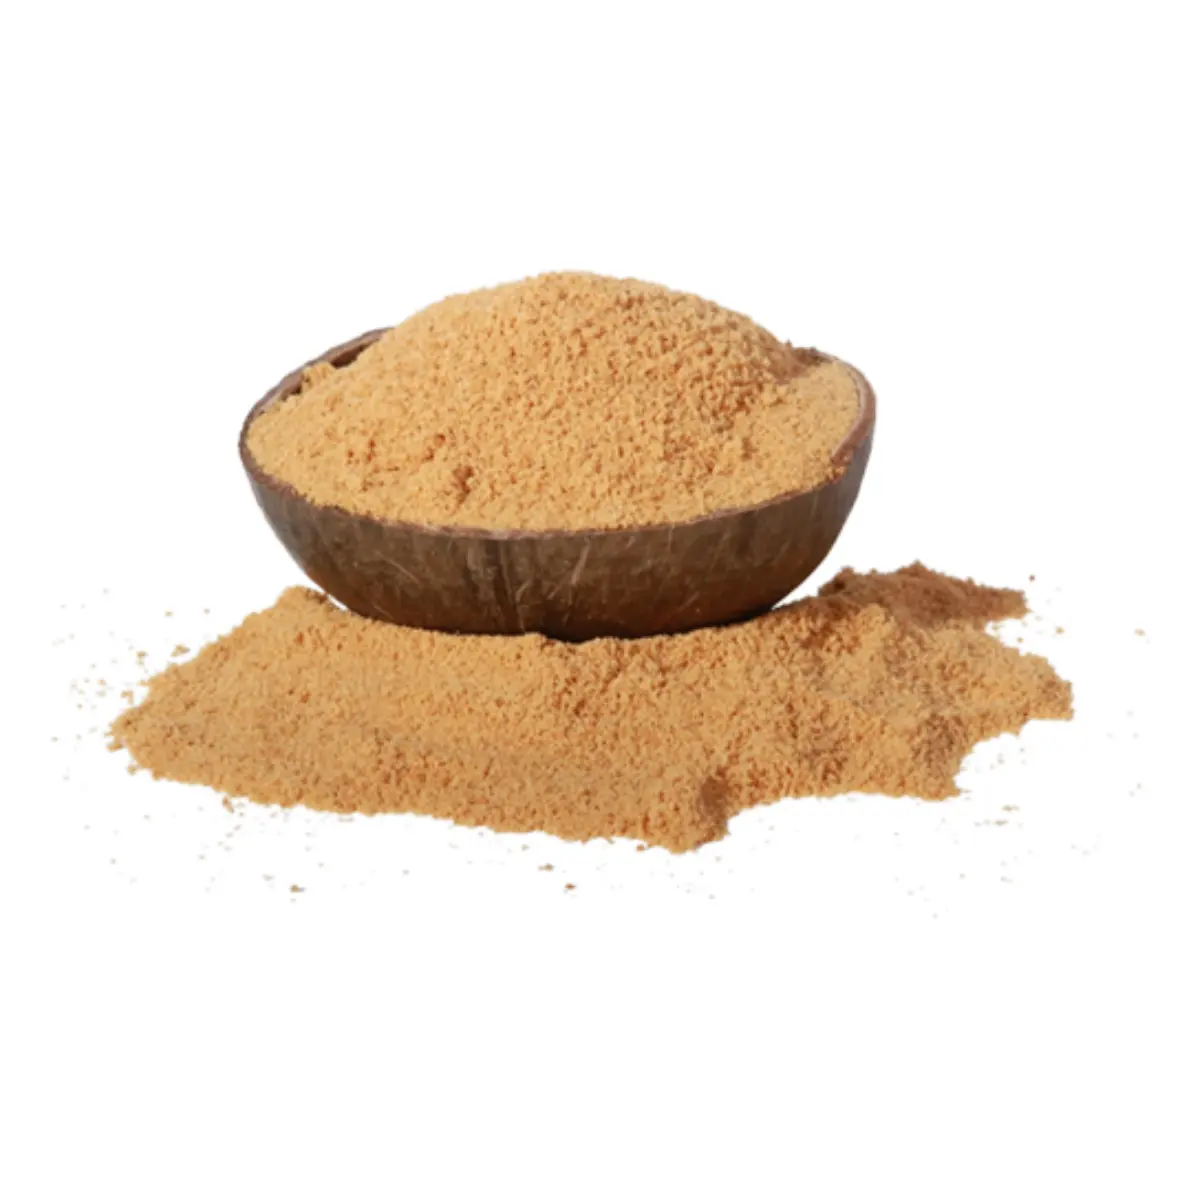 Brown sugar ICUMSA 45, refined white sugar from South Africa, both of which are reasonably priced and simple to use.